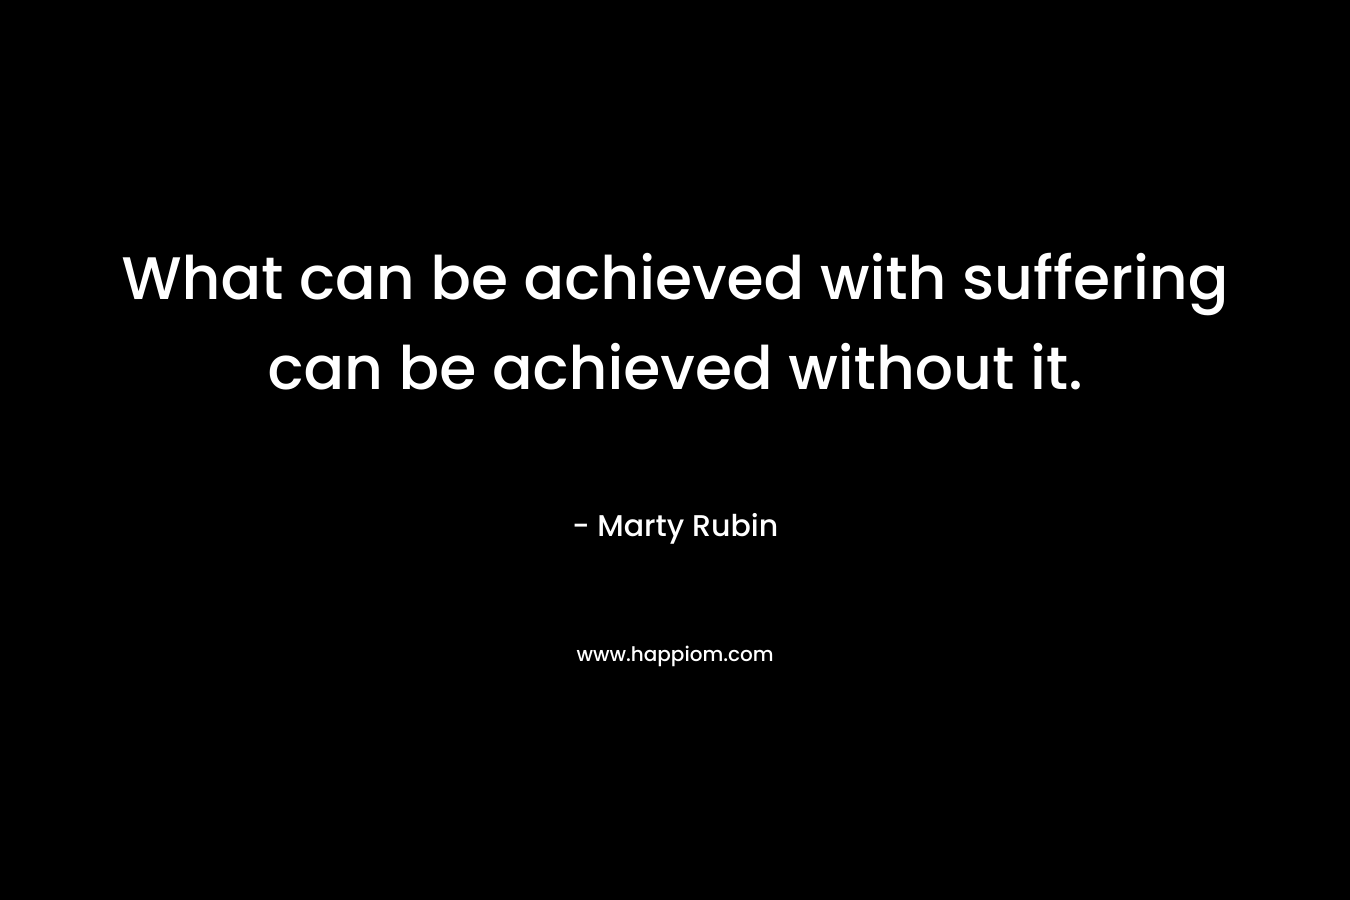 What can be achieved with suffering can be achieved without it.